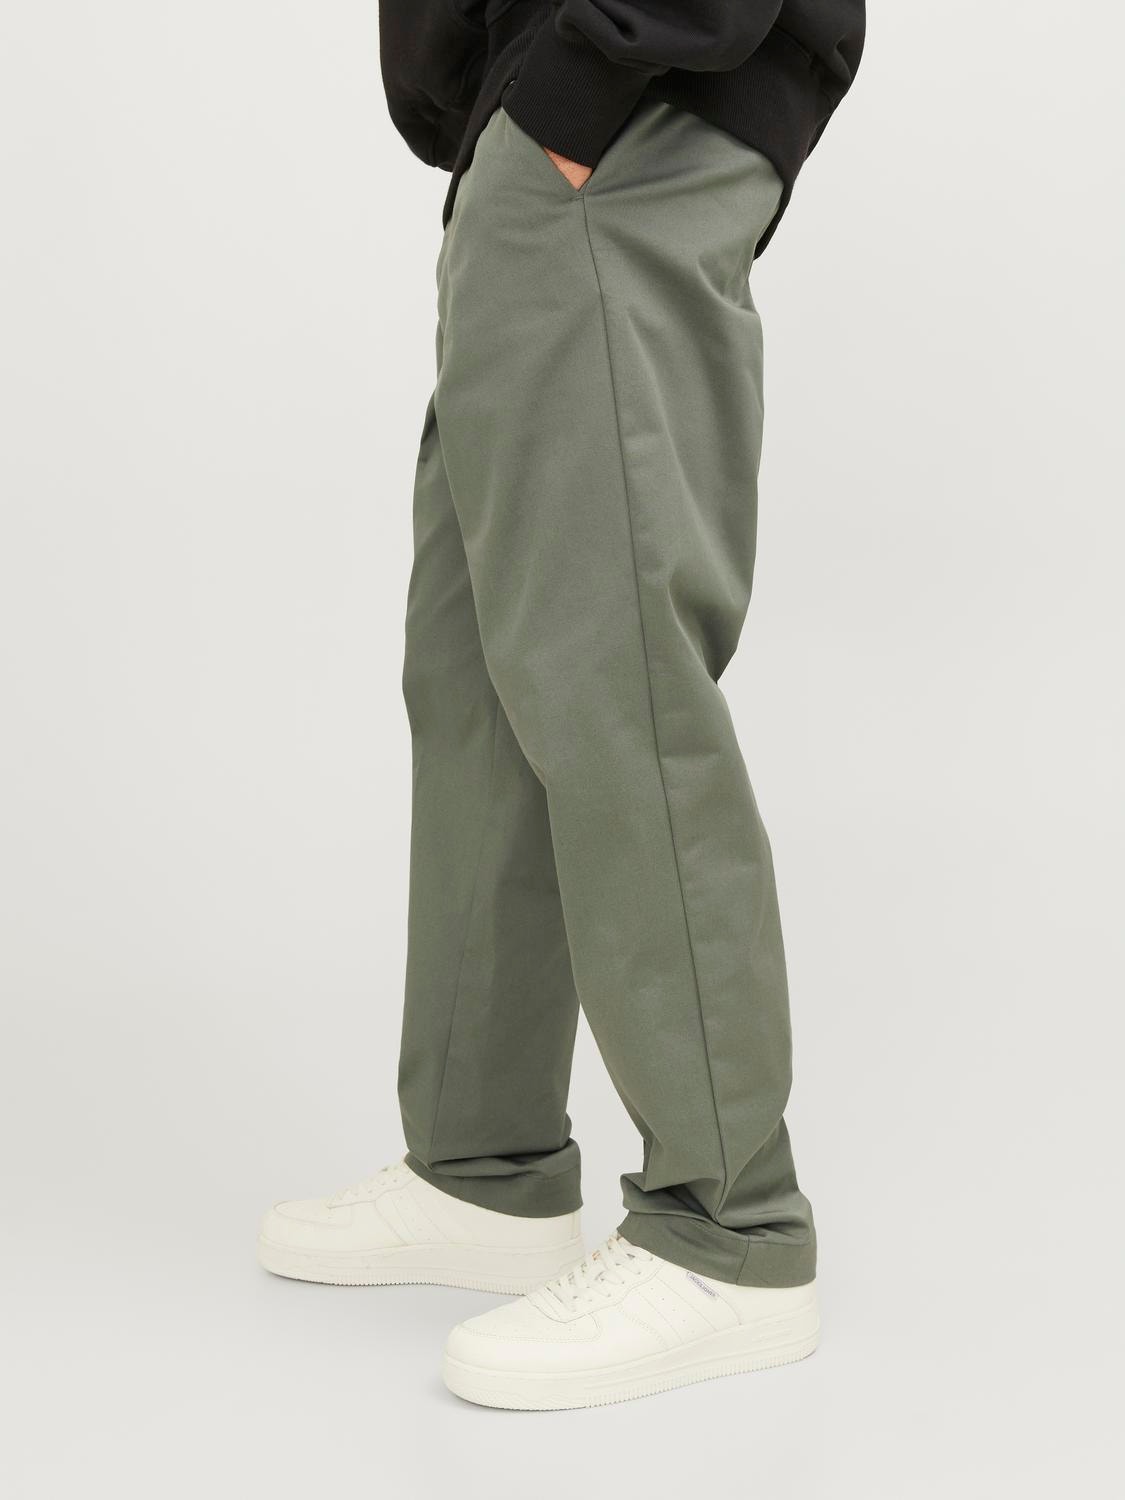 Jack & Jones Relaxed Fit Chino Hose -Agave Green - 12253083